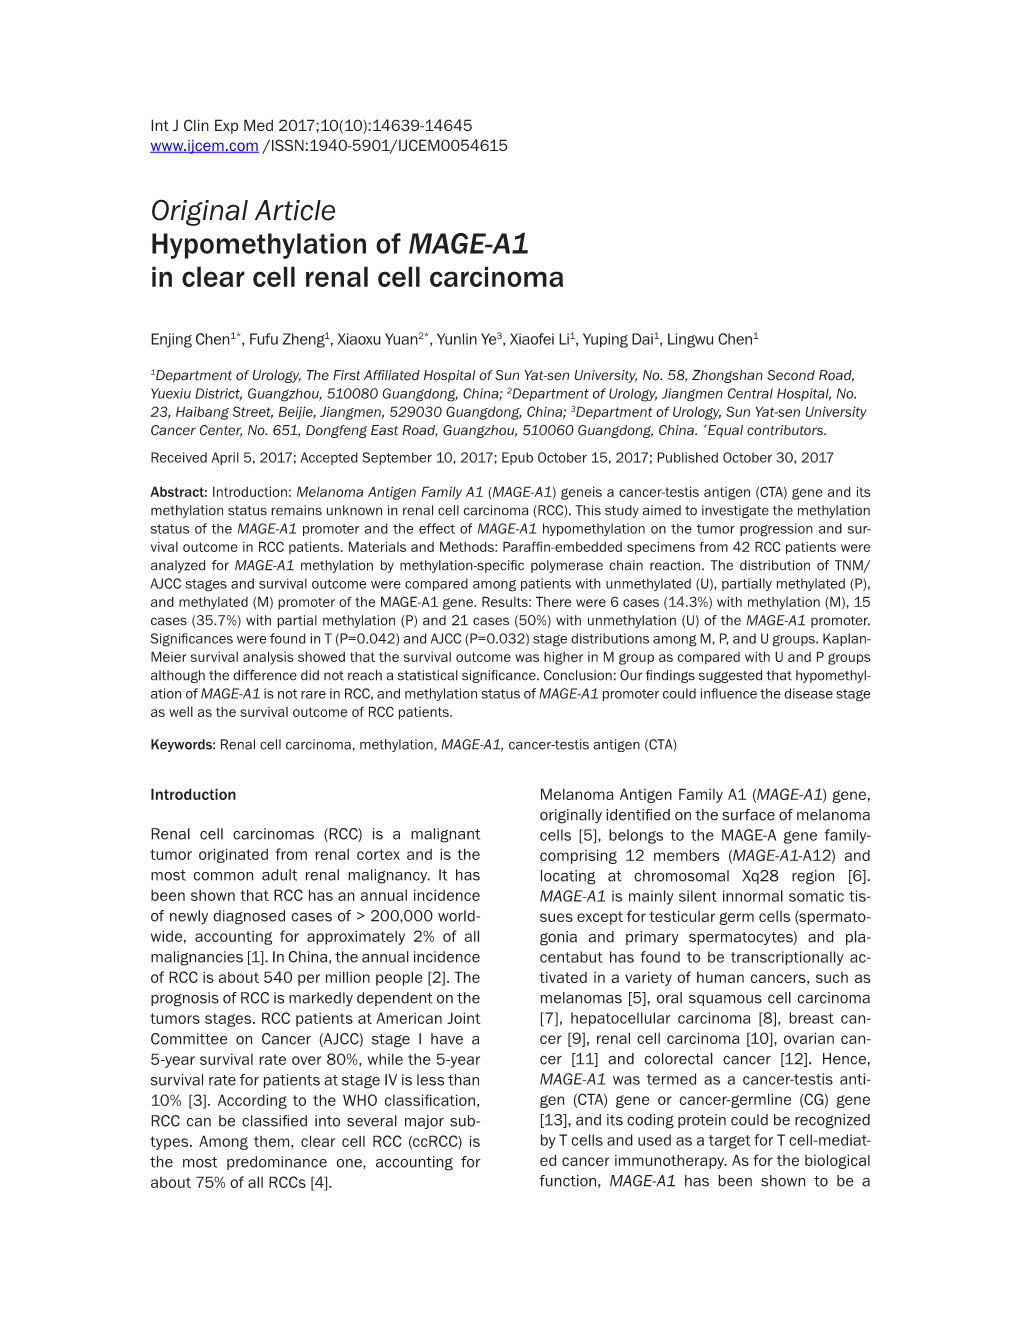 Original Article Hypomethylation of MAGE-A1 in Clear Cell Renal Cell Carcinoma